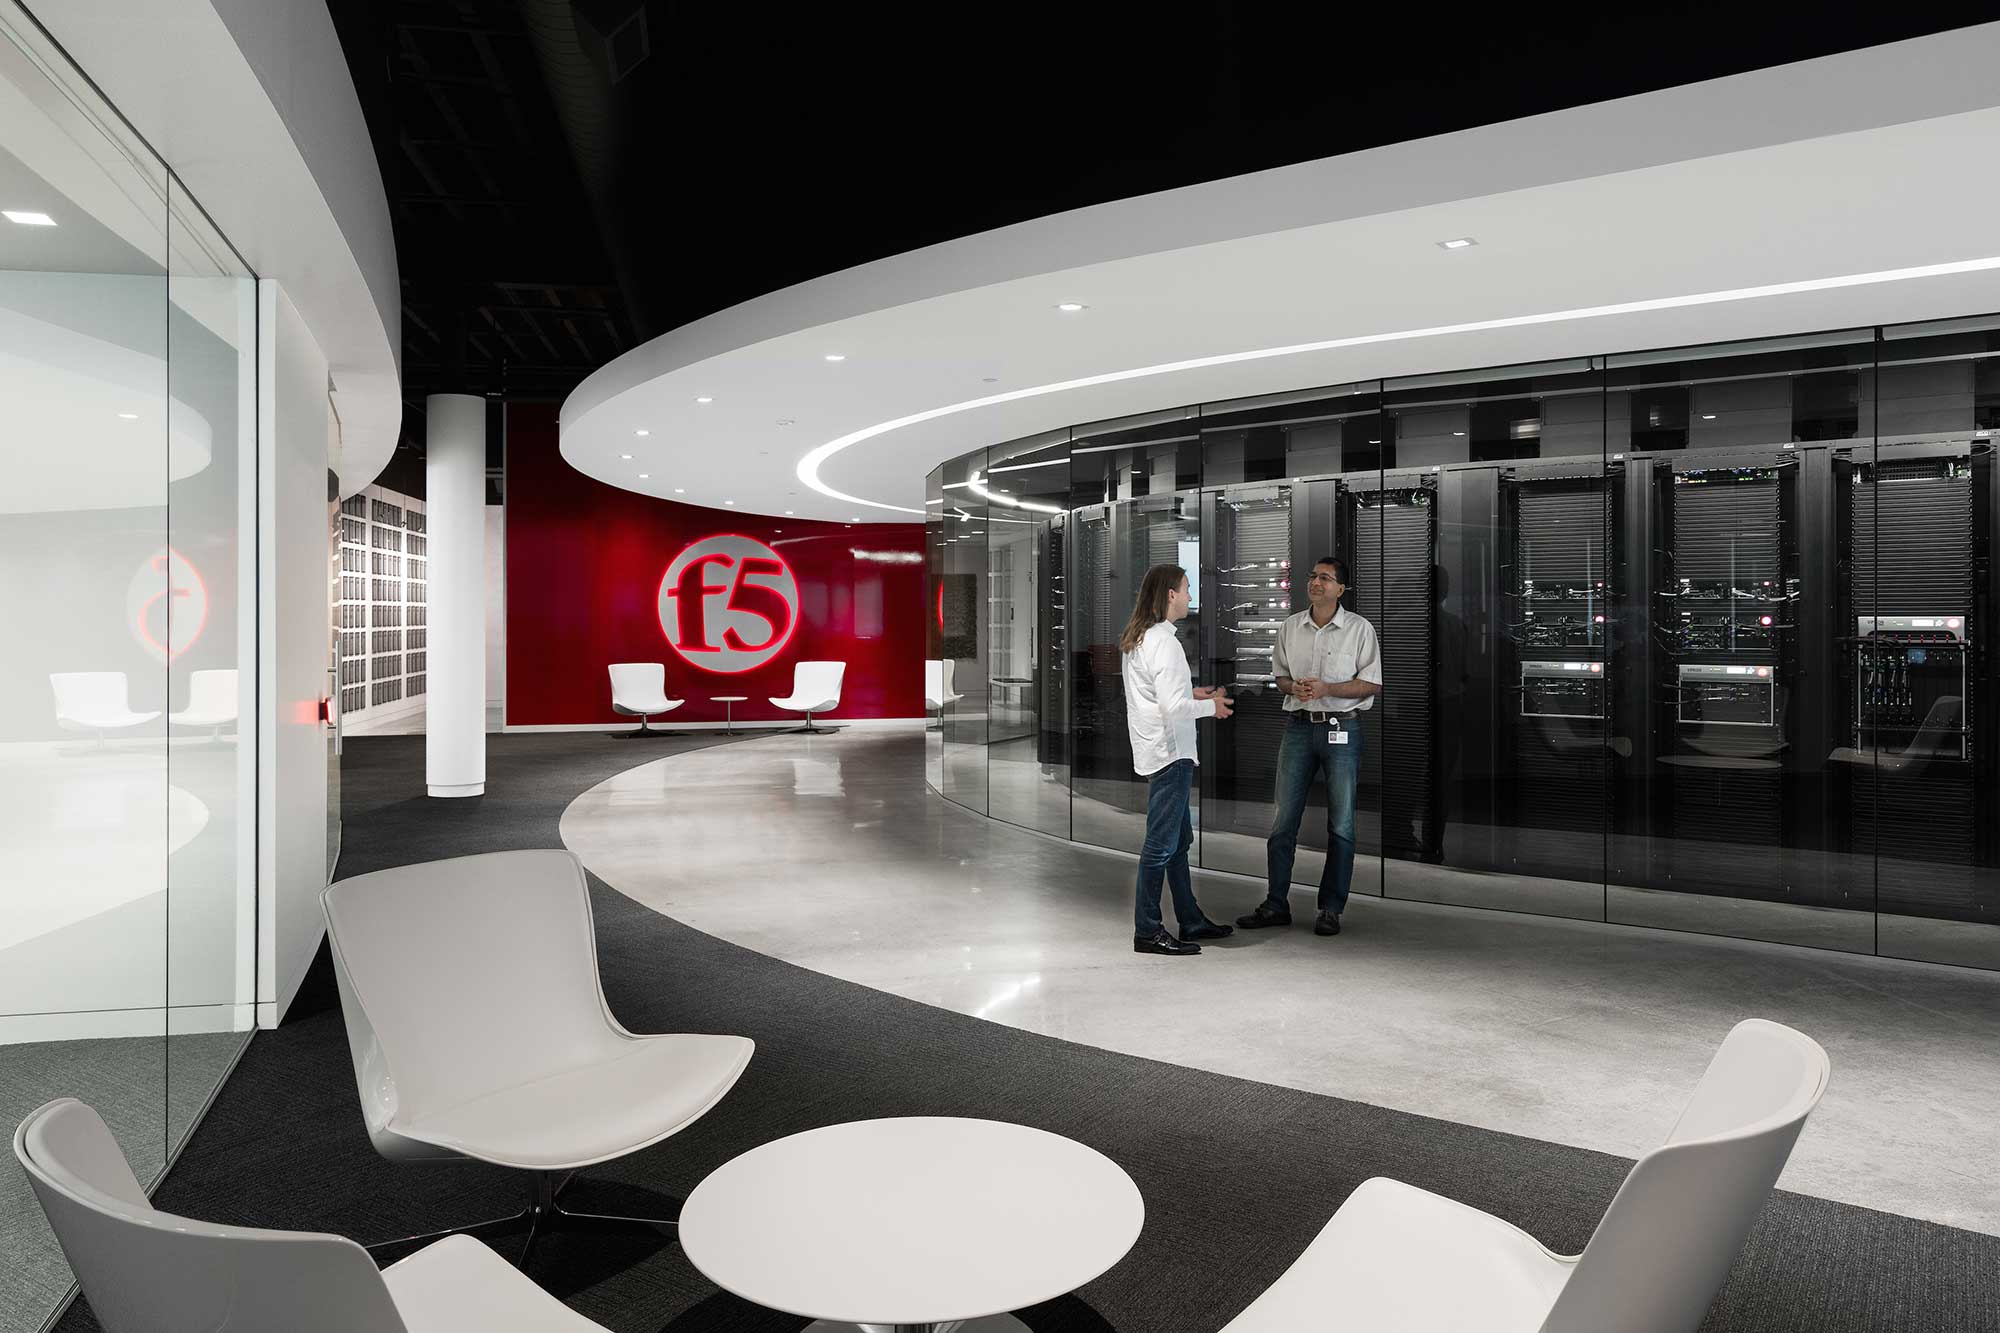 Two F5 Networks employees inside the Customer Service Center